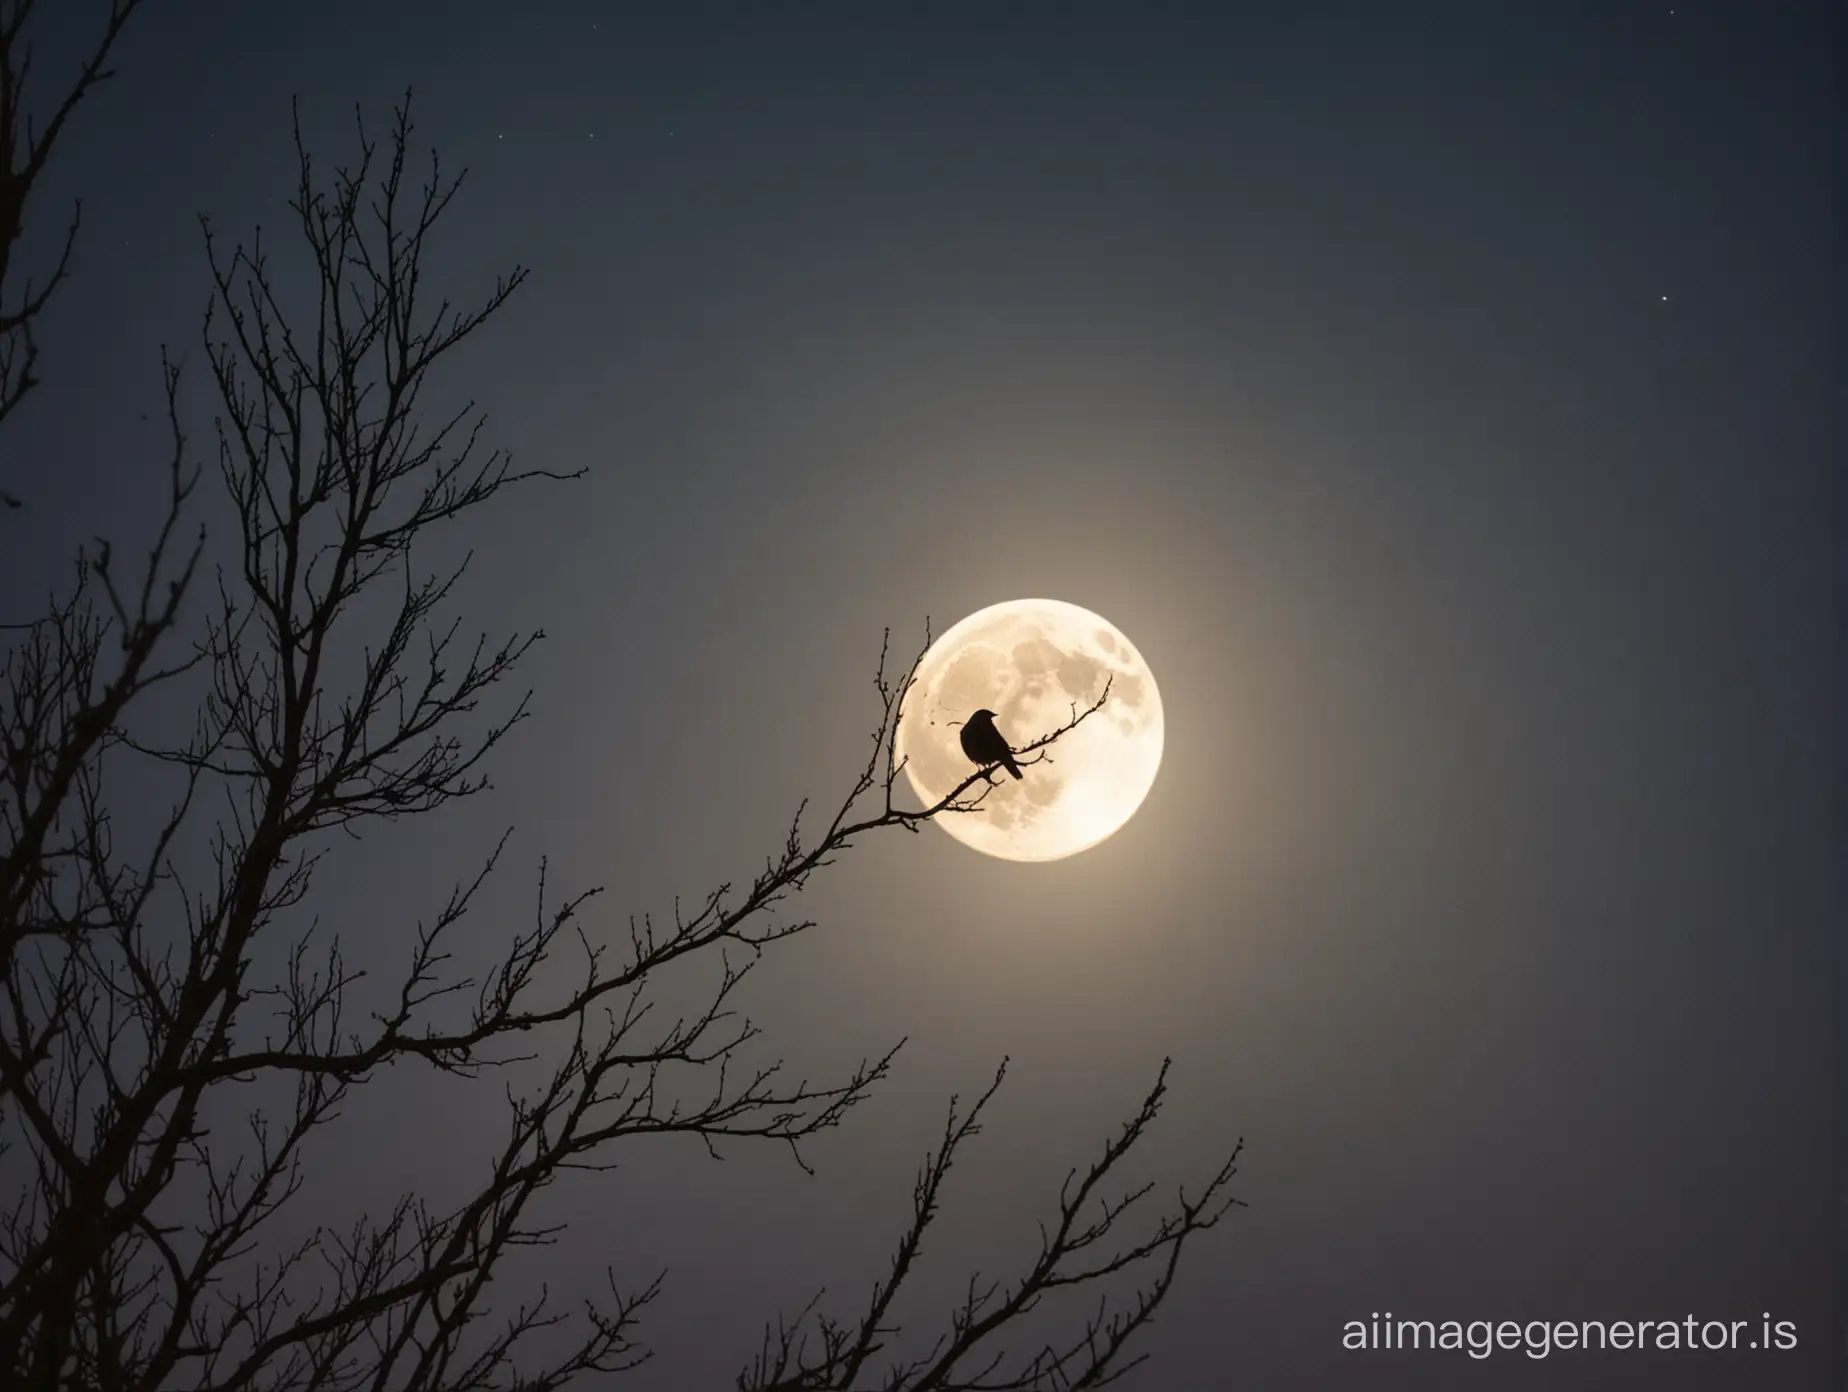 Majestic-Bird-Silhouetted-Against-Enchanting-Moonlit-Night